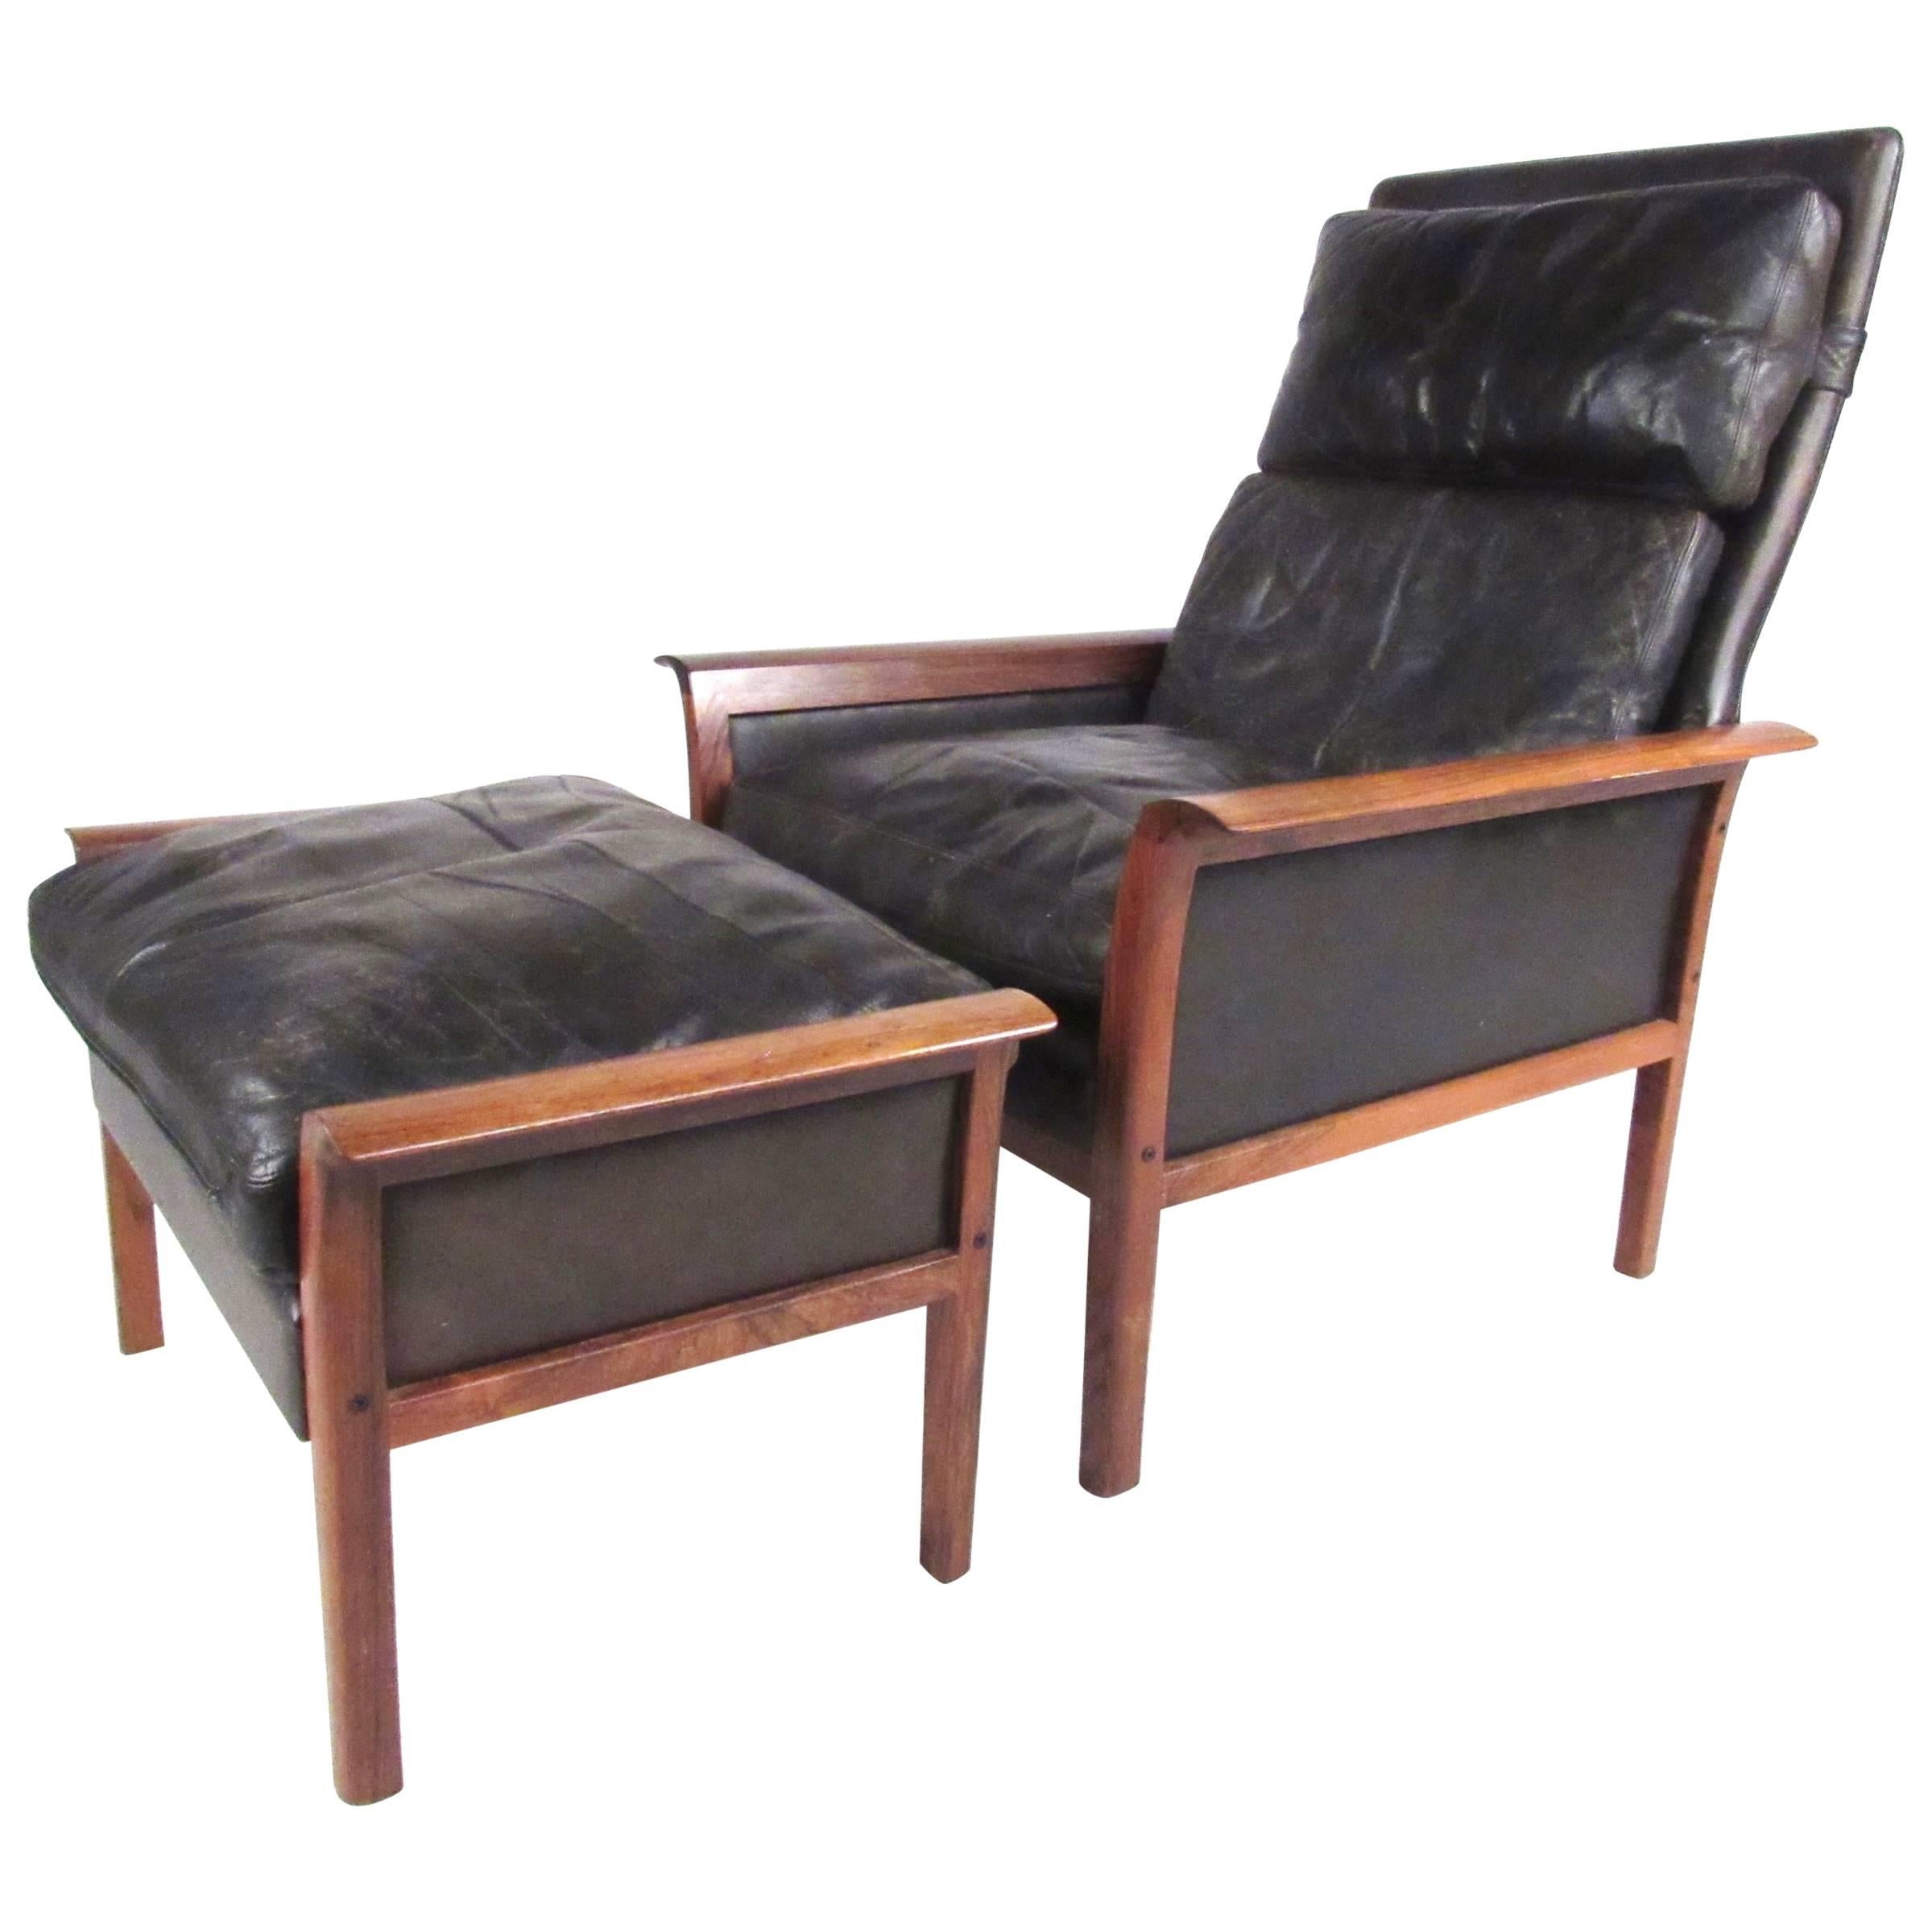 Model 924 Lounge Chair & Ottoman by Knut Sæter for Vatne Mobler